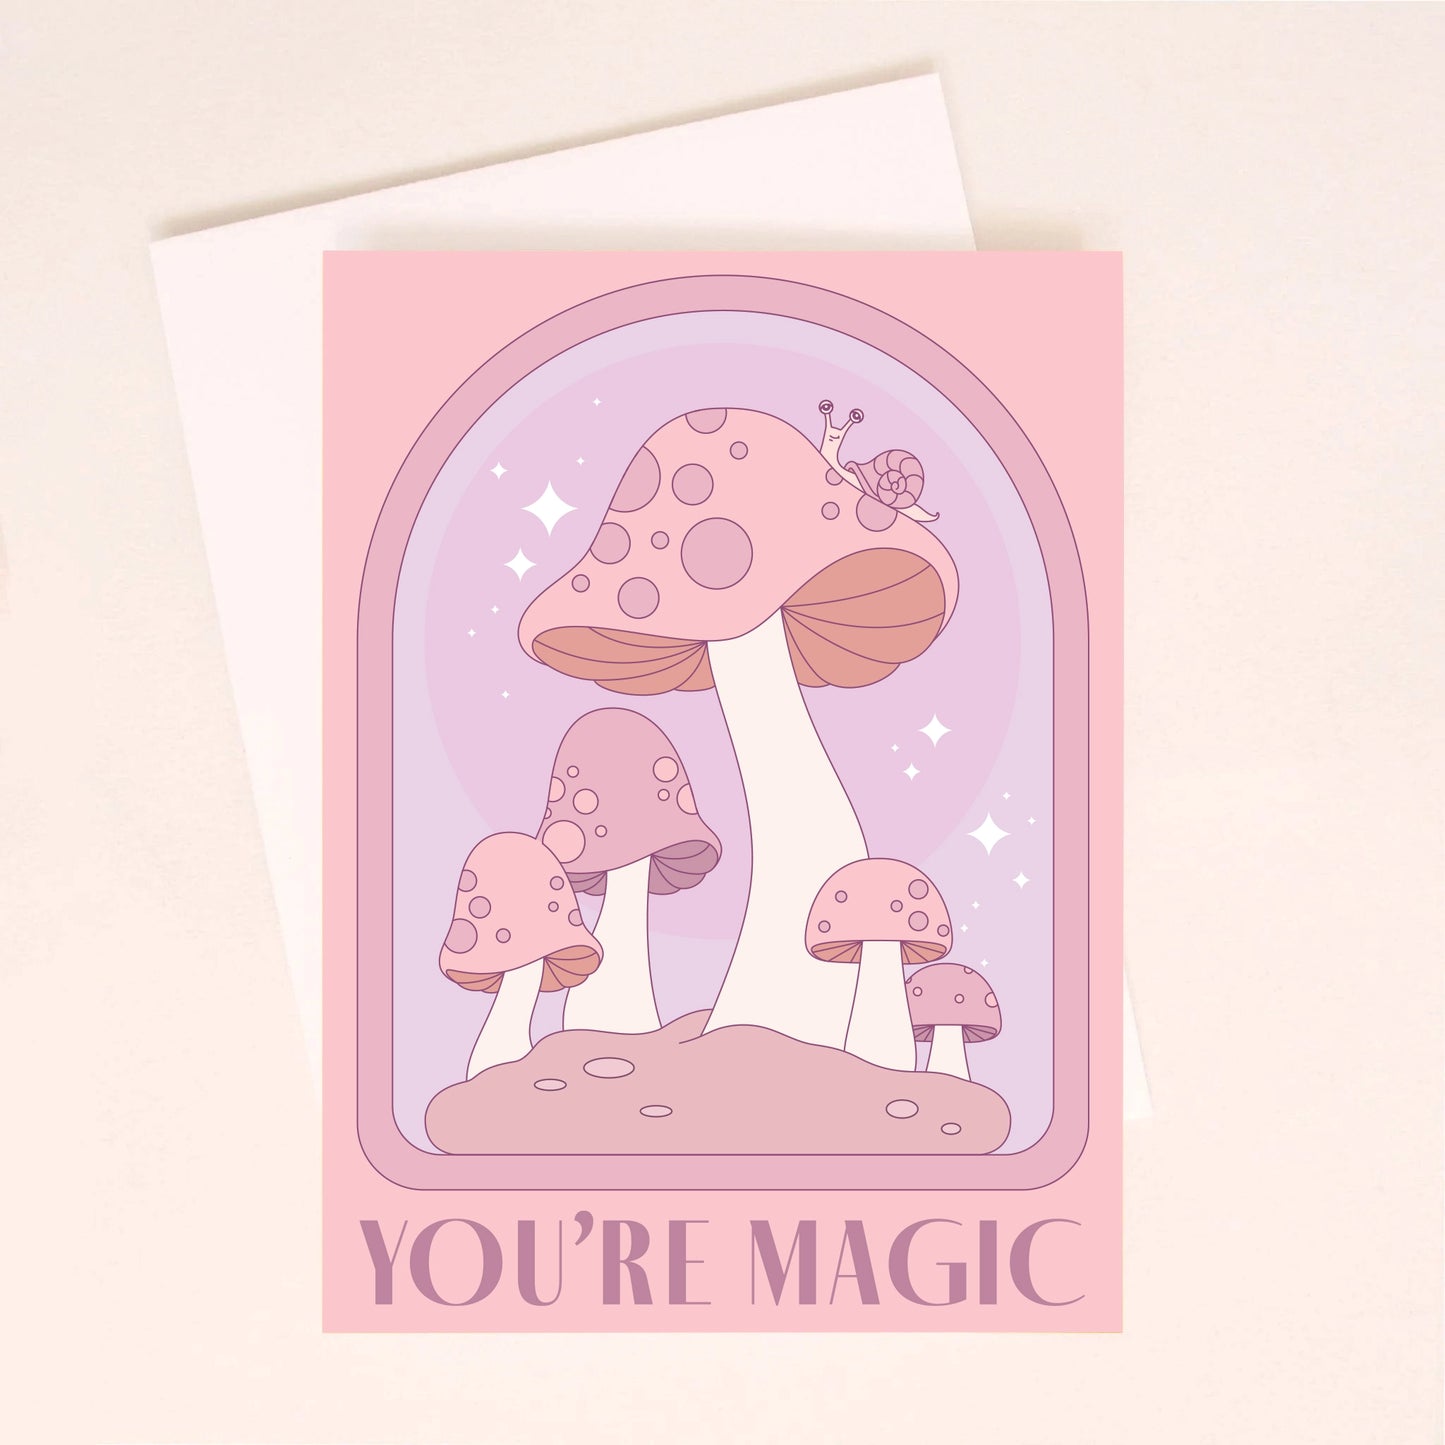 On a light pink background is a pink and purple card with an arch and mushroom design as well as text along the bottom that reads, "You're Magic". A white envelope is included with purchase, also shown here. 